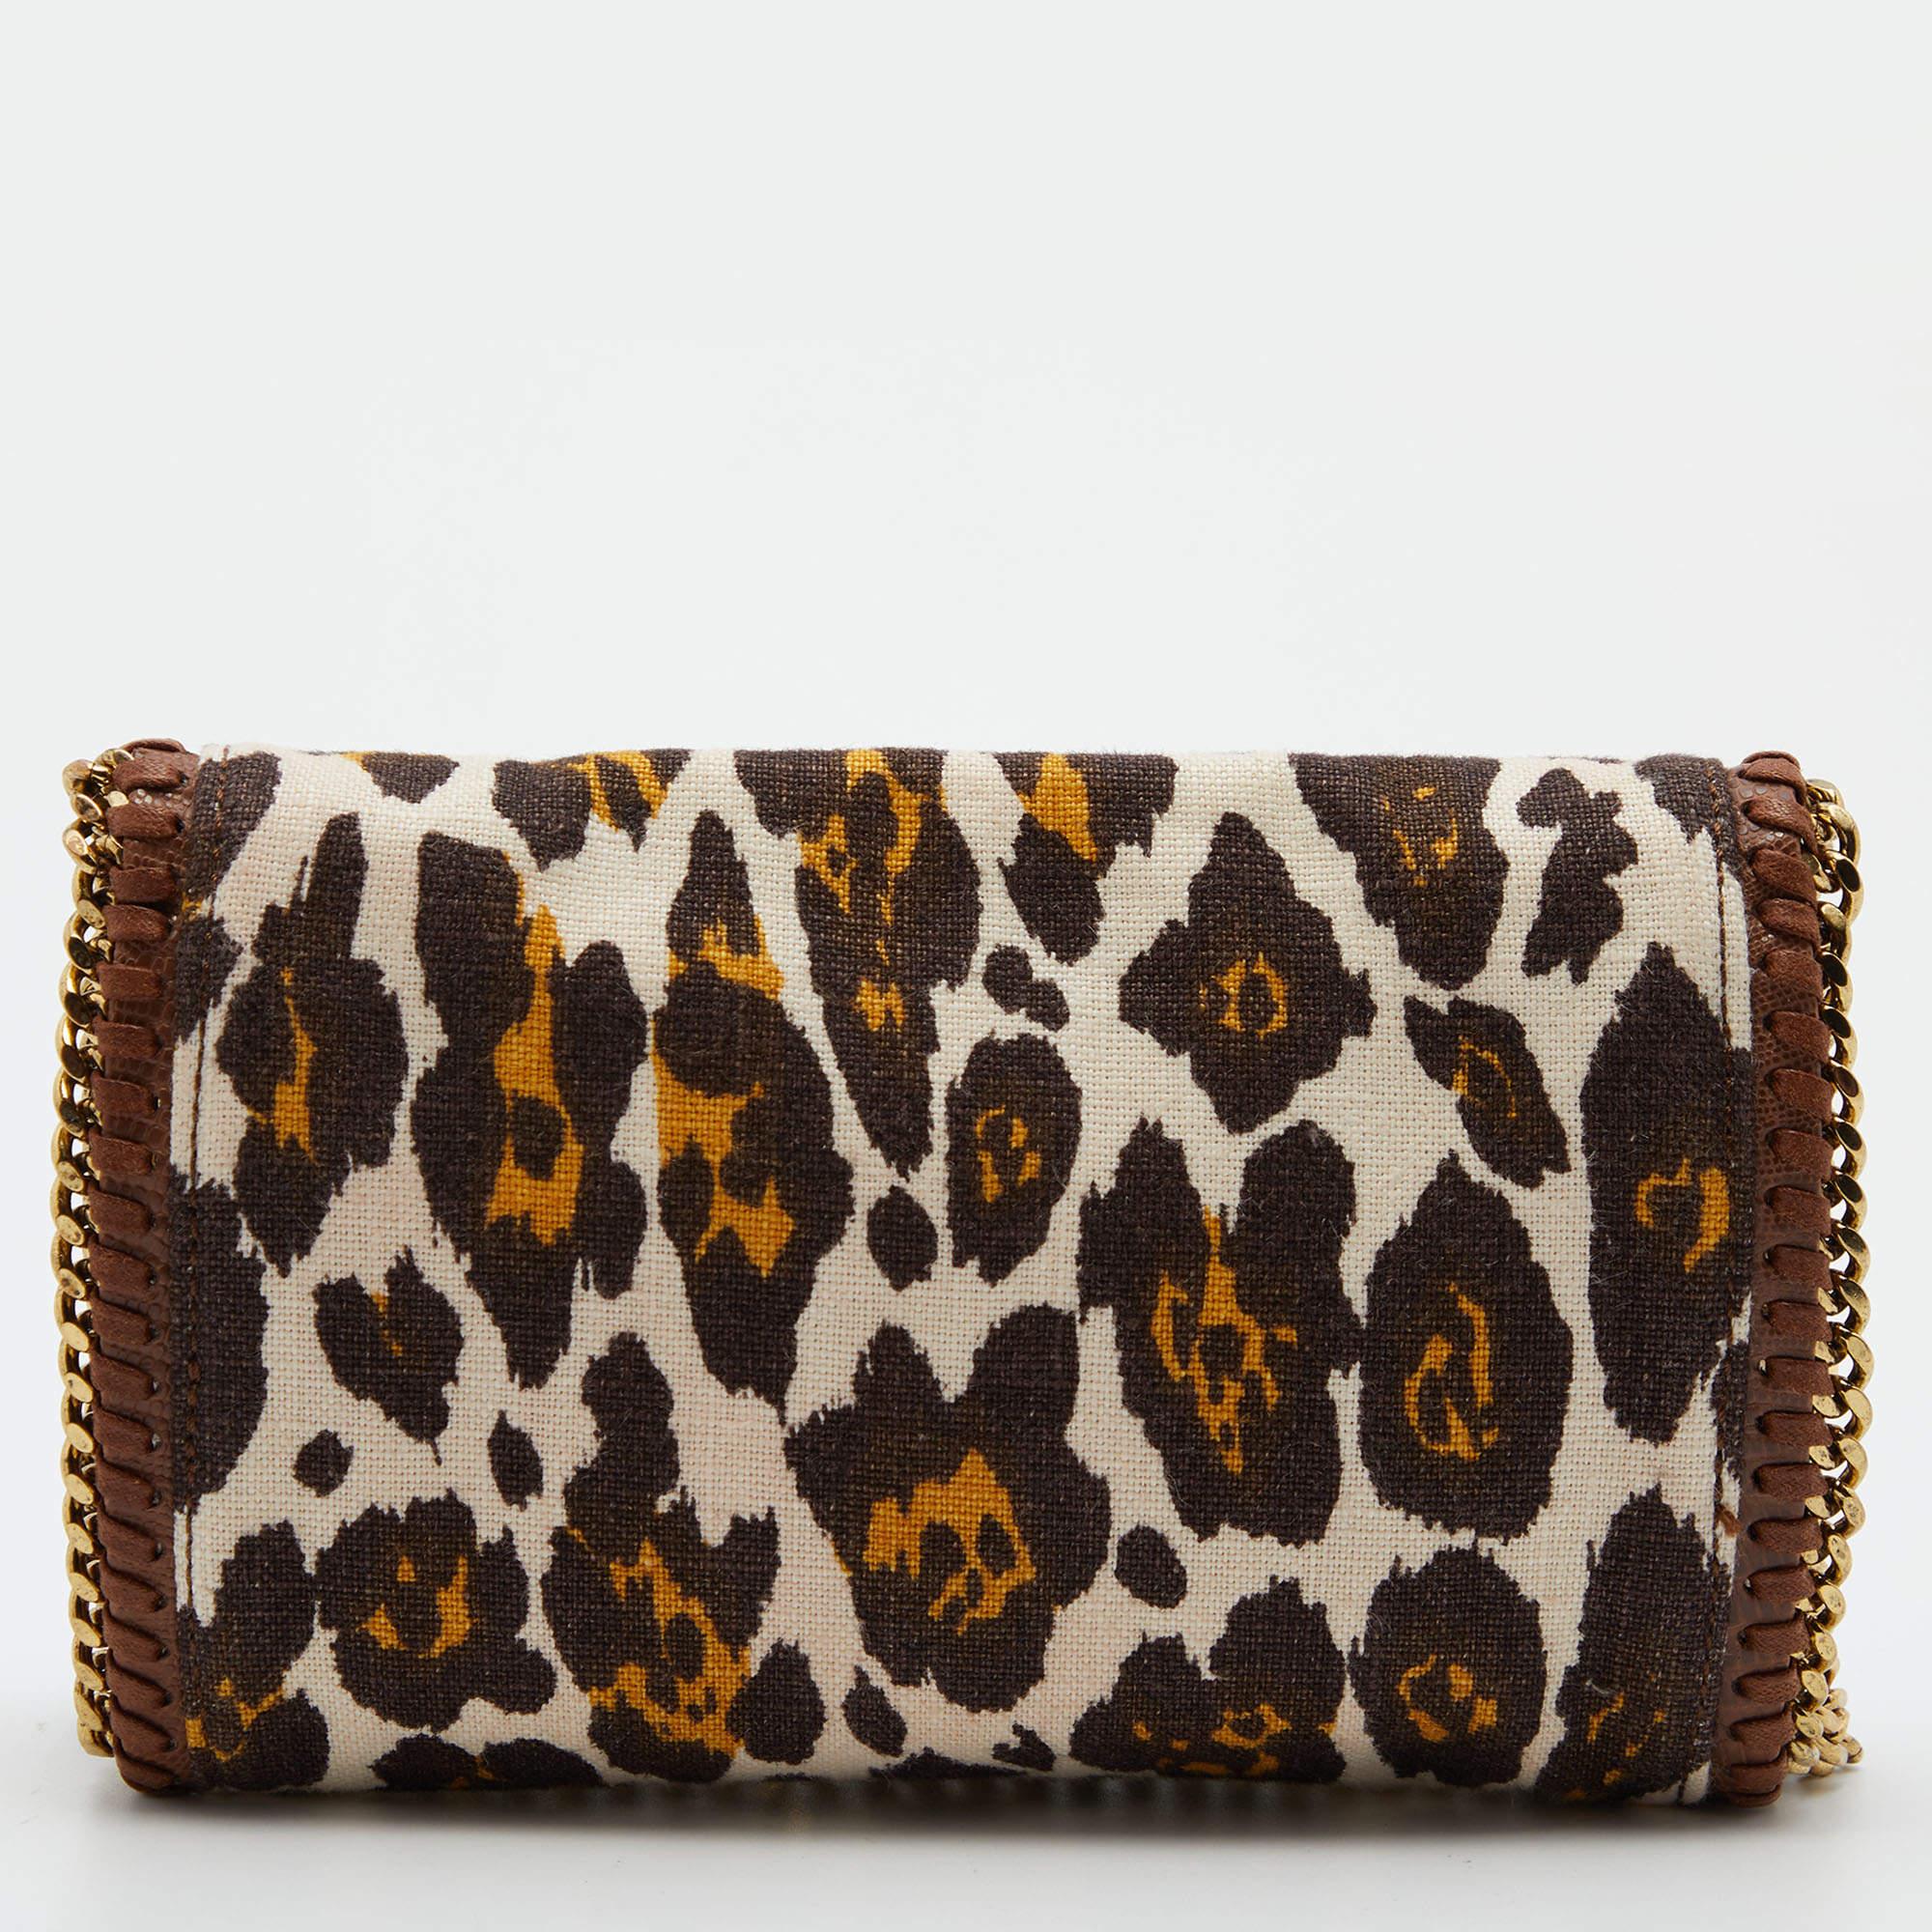 This Falabella crossbody bag from Stella McCartney is one of her most popular designs. It is crafted in leopard-print canvas & faux leather with the addition of gold-tone hardware forming the chain-trimmed edges and long chain strap. It has a